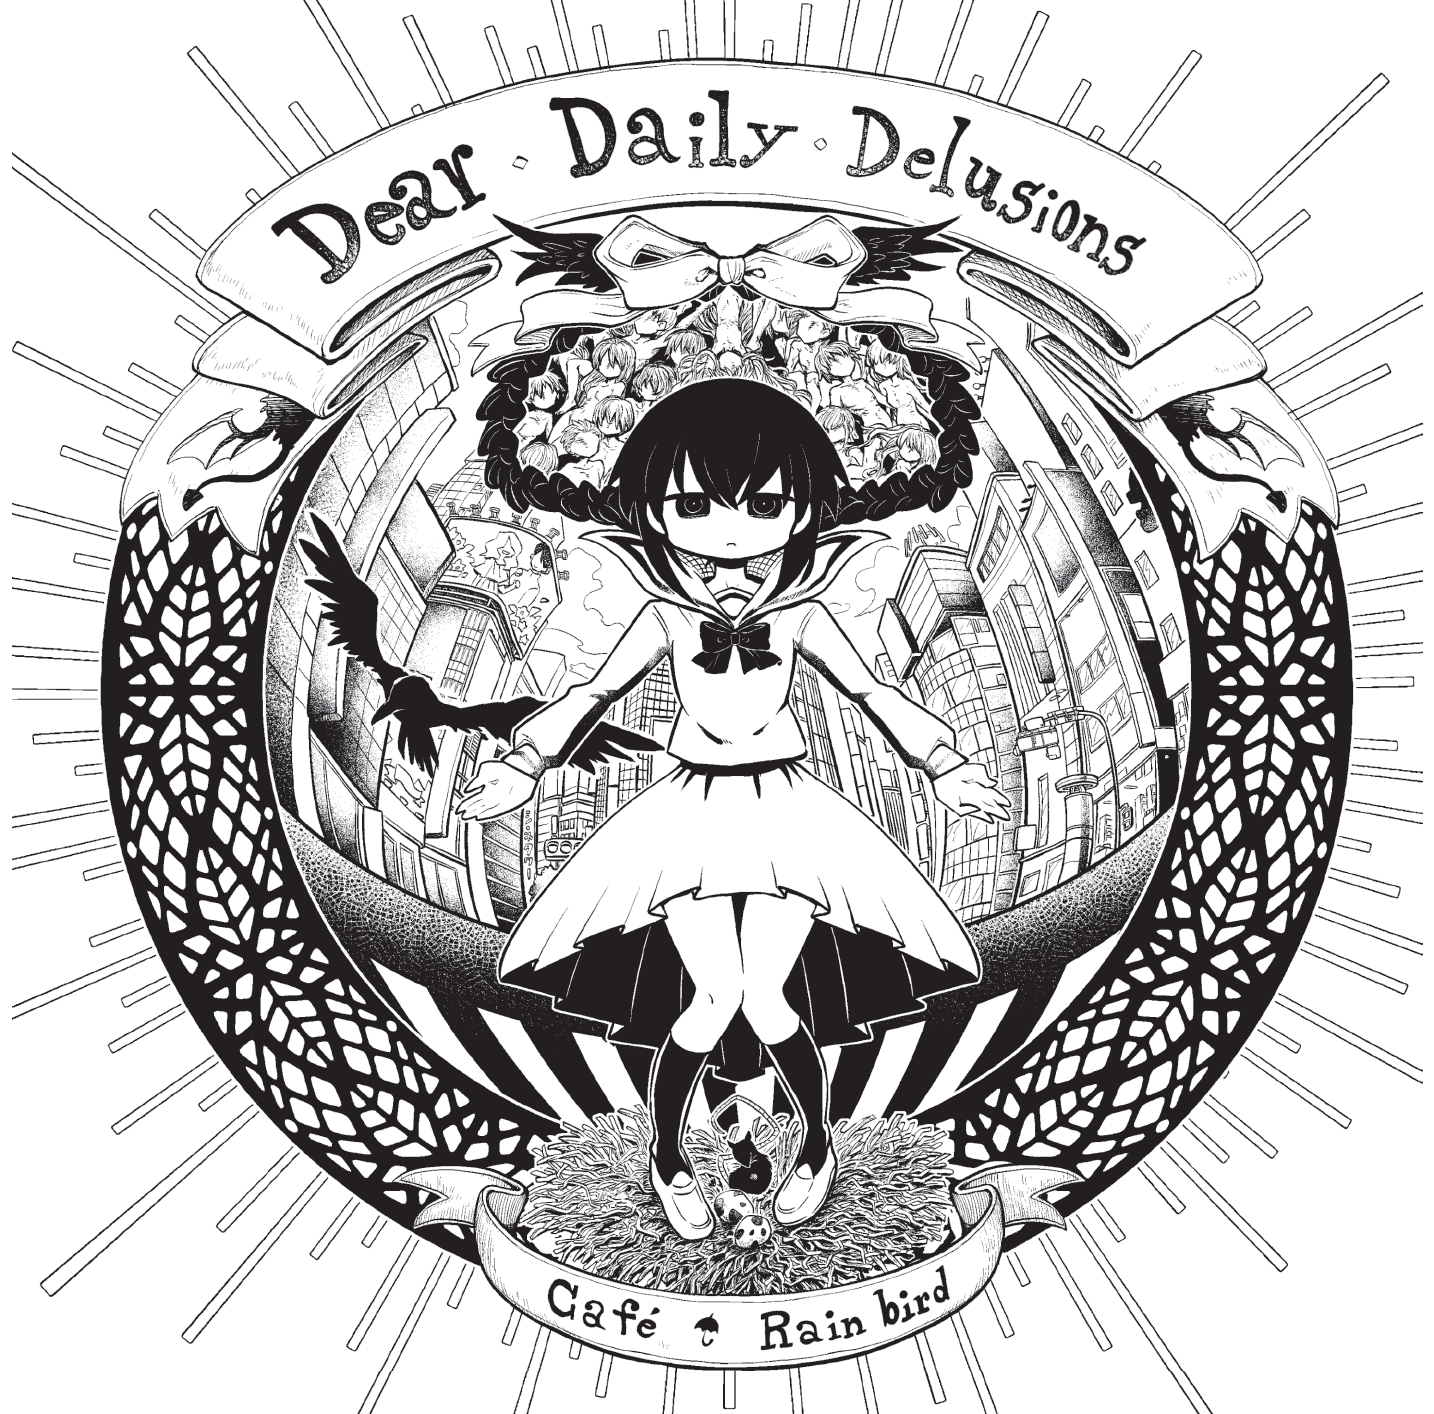 Dear Daily Delusions jacket